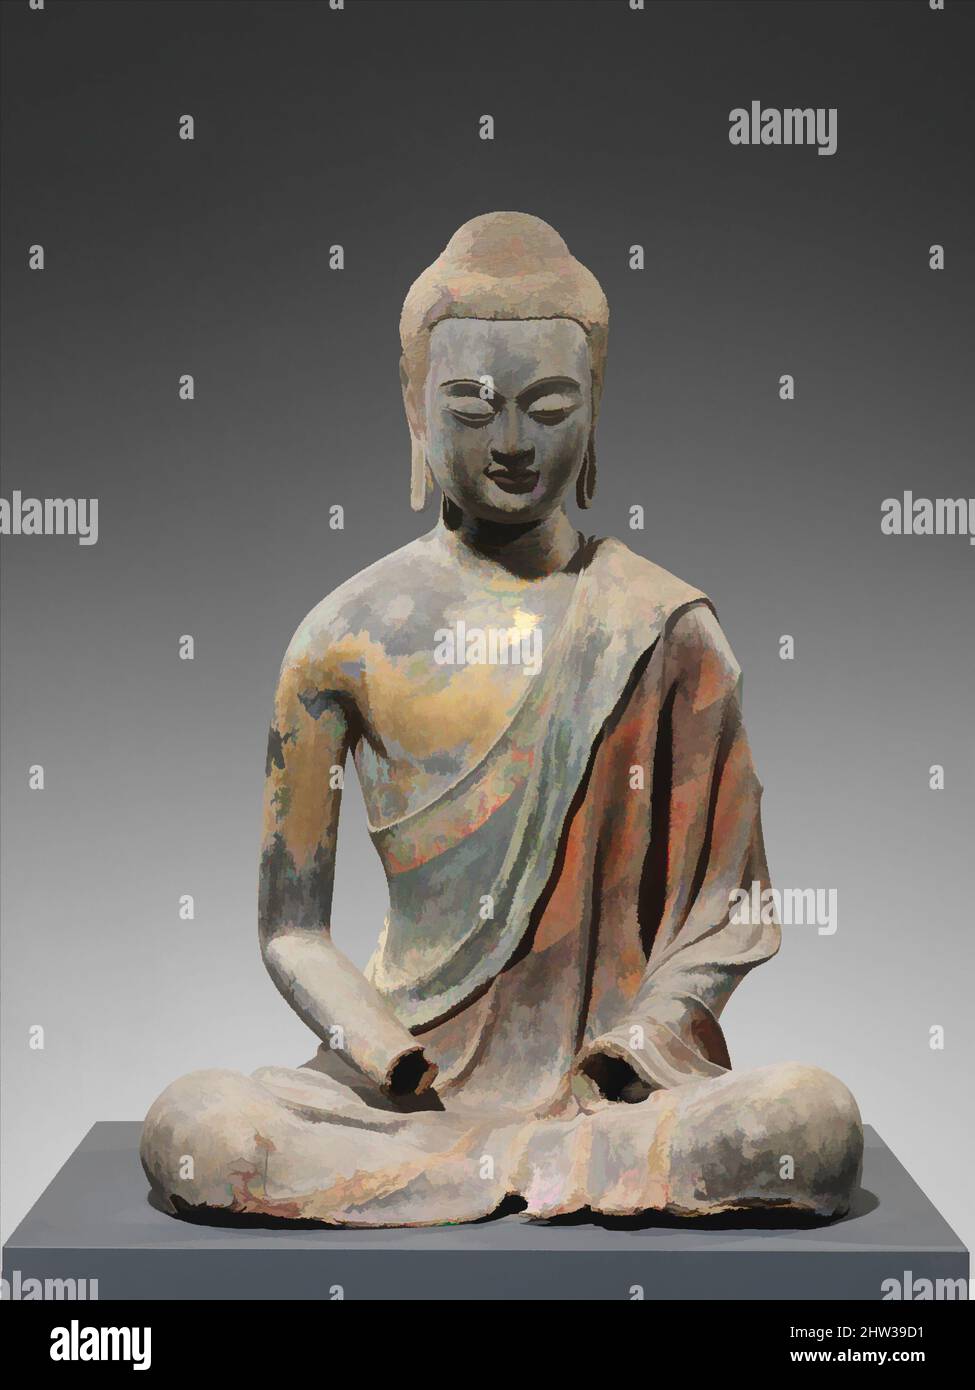 Art inspired by 唐 彩繪漆金夾紵阿彌陀佛像, Buddha, Probably Amitabha (Amituofo), Tang dynasty (618–907), early 7th century, China, Hollow dry lacquer with traces of gilt and polychrome pigment and gilding, H. 38 in. (96.5 cm); W. 27 in. (68.6 cm); D. 22 1/2 in. (57.1 cm), Sculpture, The position, Classic works modernized by Artotop with a splash of modernity. Shapes, color and value, eye-catching visual impact on art. Emotions through freedom of artworks in a contemporary way. A timeless message pursuing a wildly creative new direction. Artists turning to the digital medium and creating the Artotop NFT Stock Photo